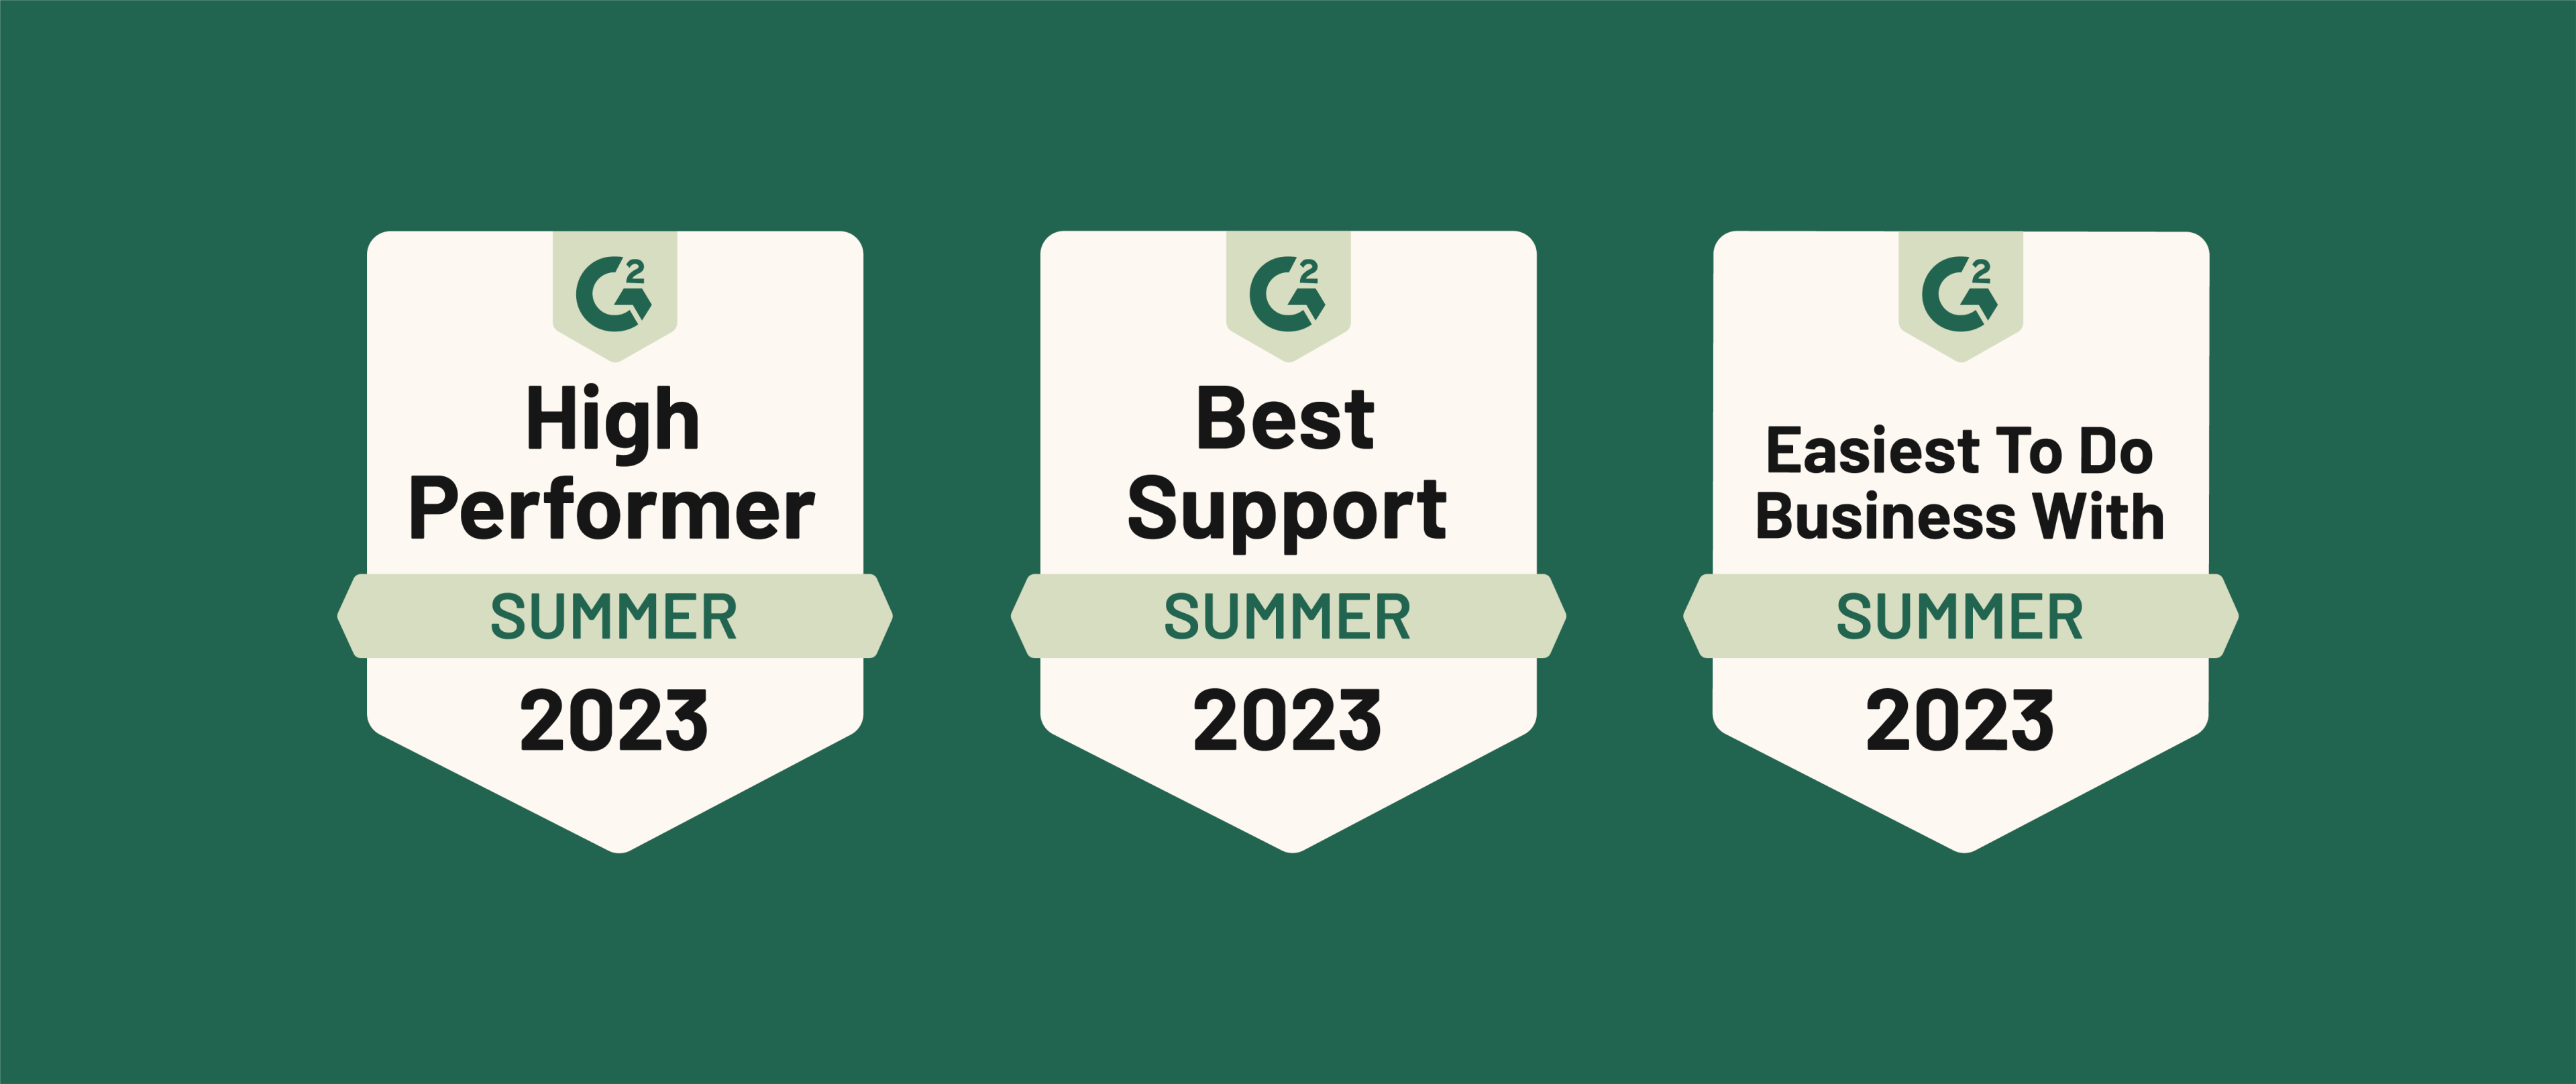 &Open receives 8 badges and awards in G2’s Summer Reports for 2023